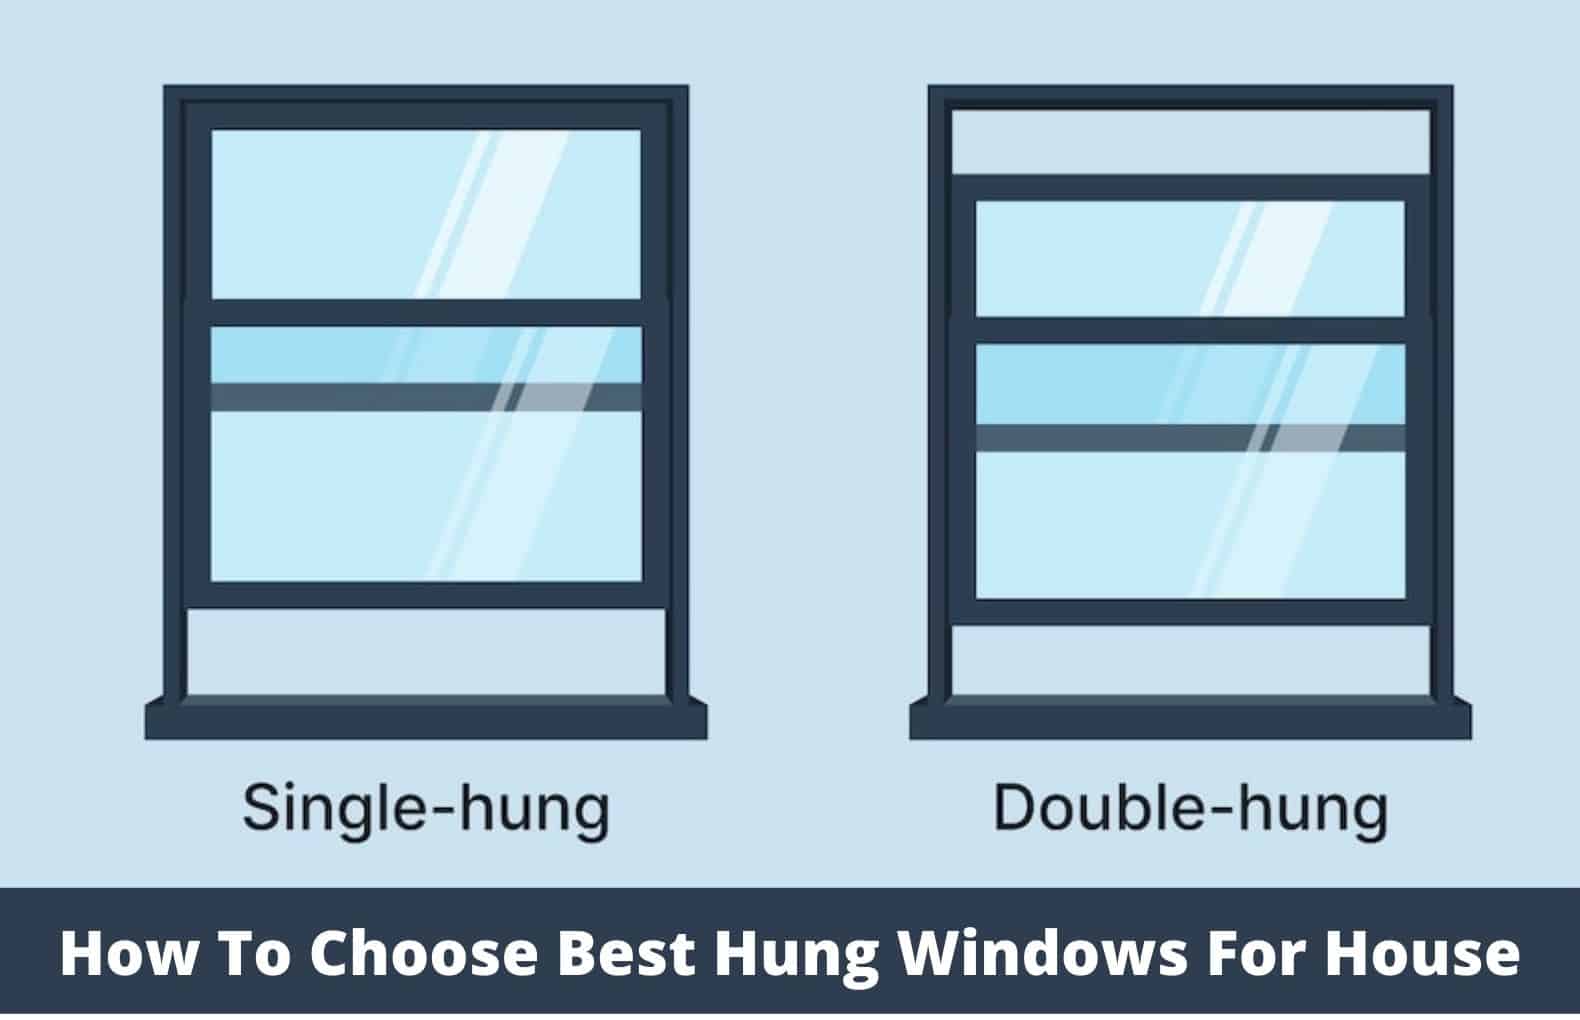 How To Choose The Best Hung Windows For Your House?